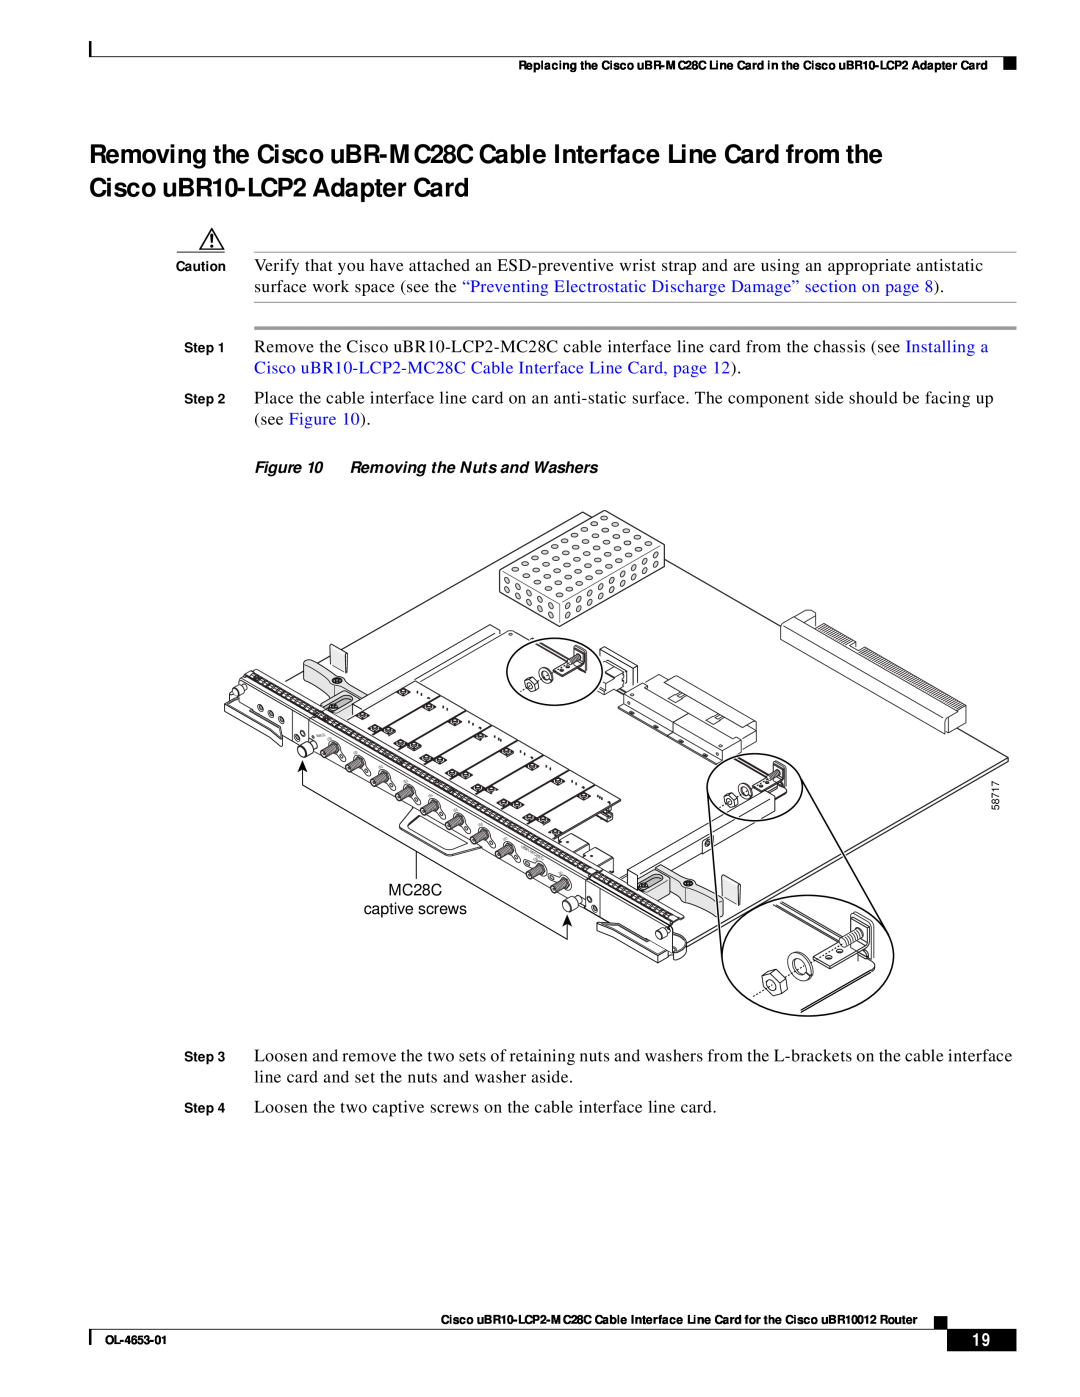 Cisco Systems uBR10-LCP2-MC28C manual Loosen the two captive screws on the cable interface line card 